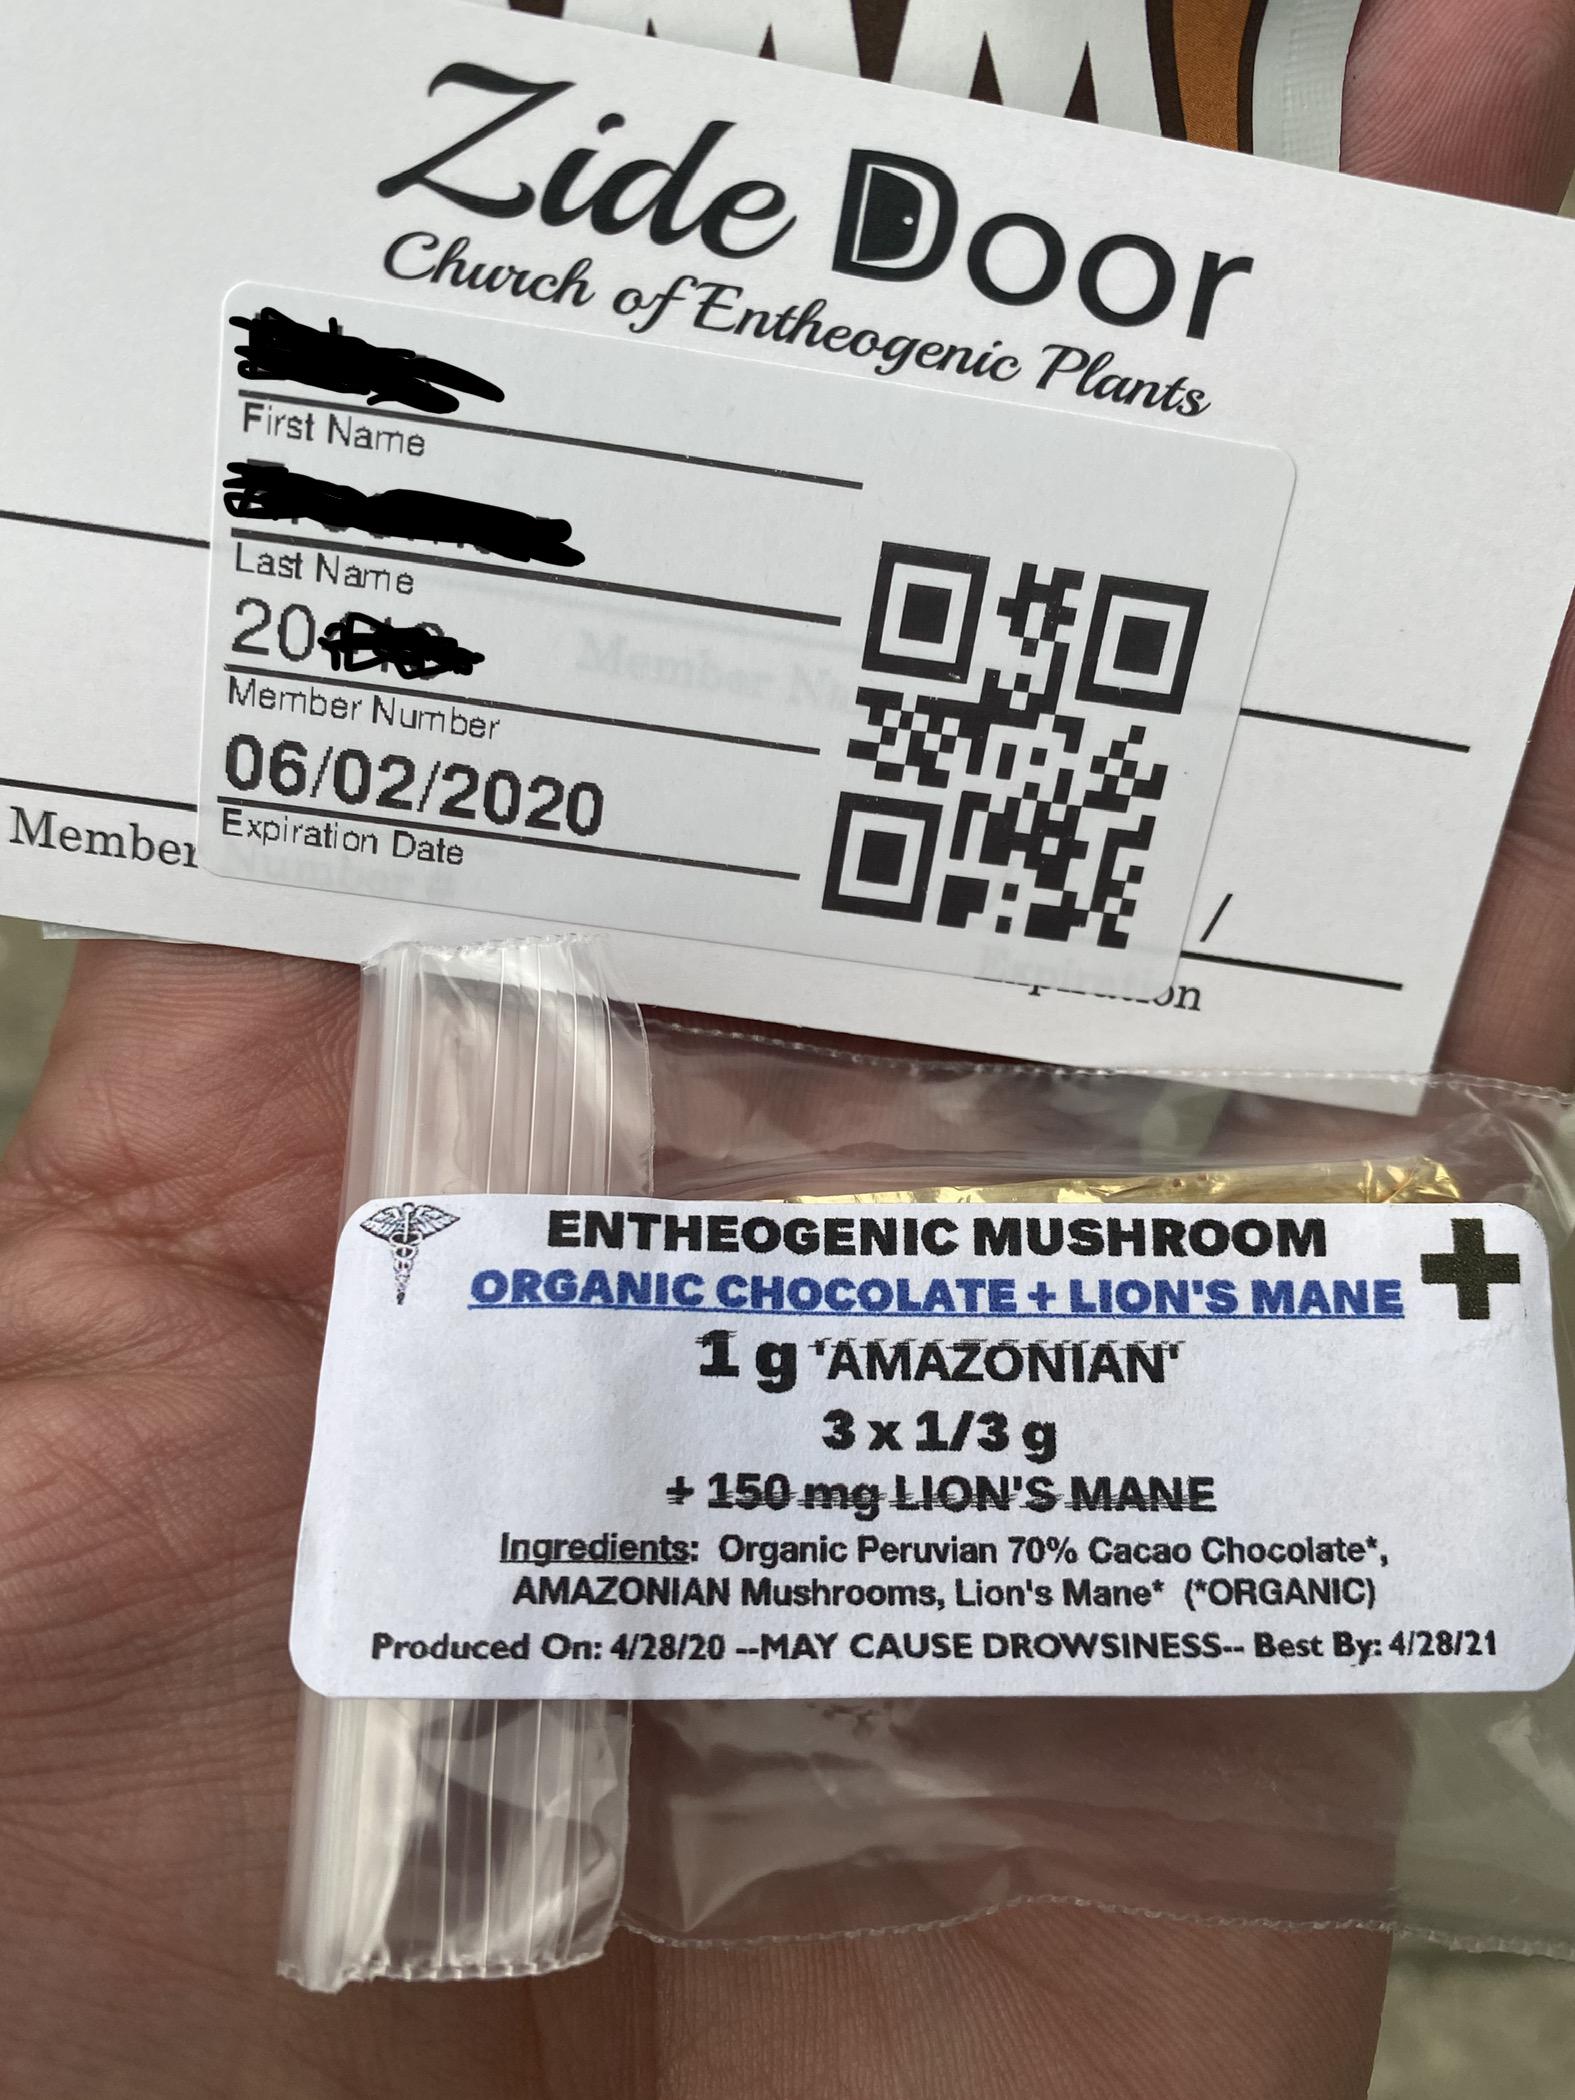 The Zide Door Church of Entheogenic Plants has encouraged the use of mushrooms and weed with its members. Is that why it got shut down this month?